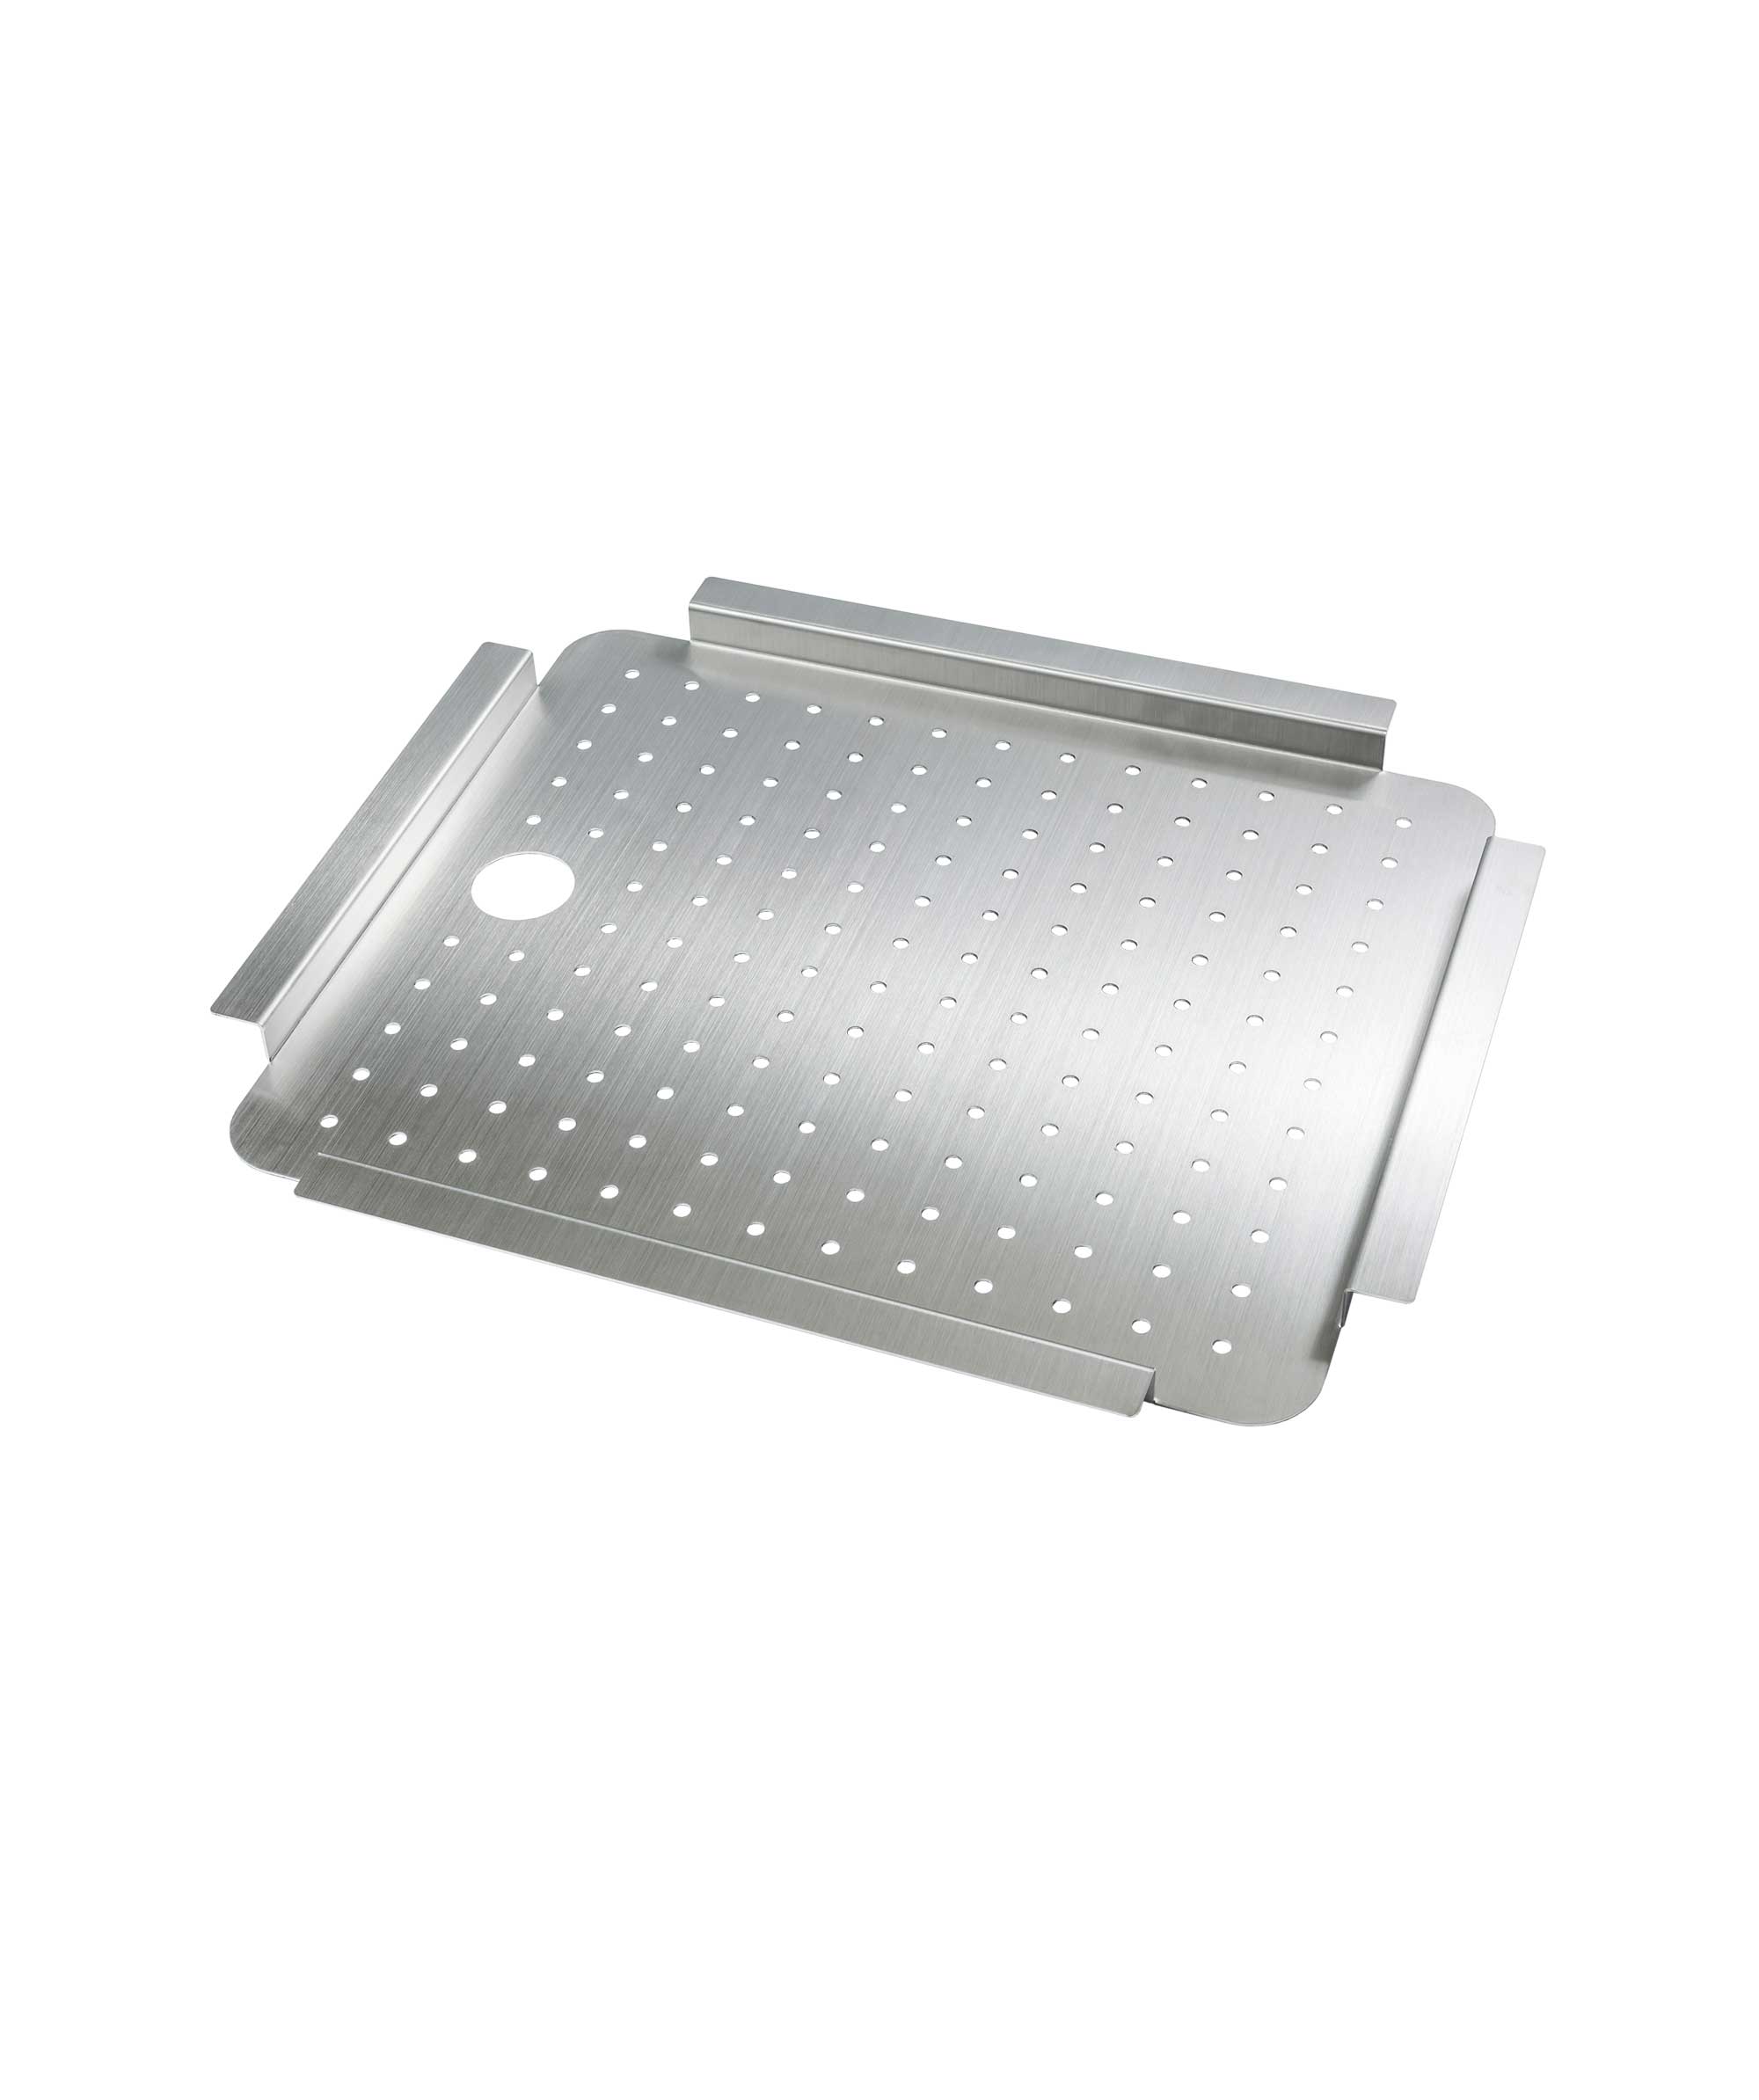 Drainer Tray - for Tetra, Kubic, Leto